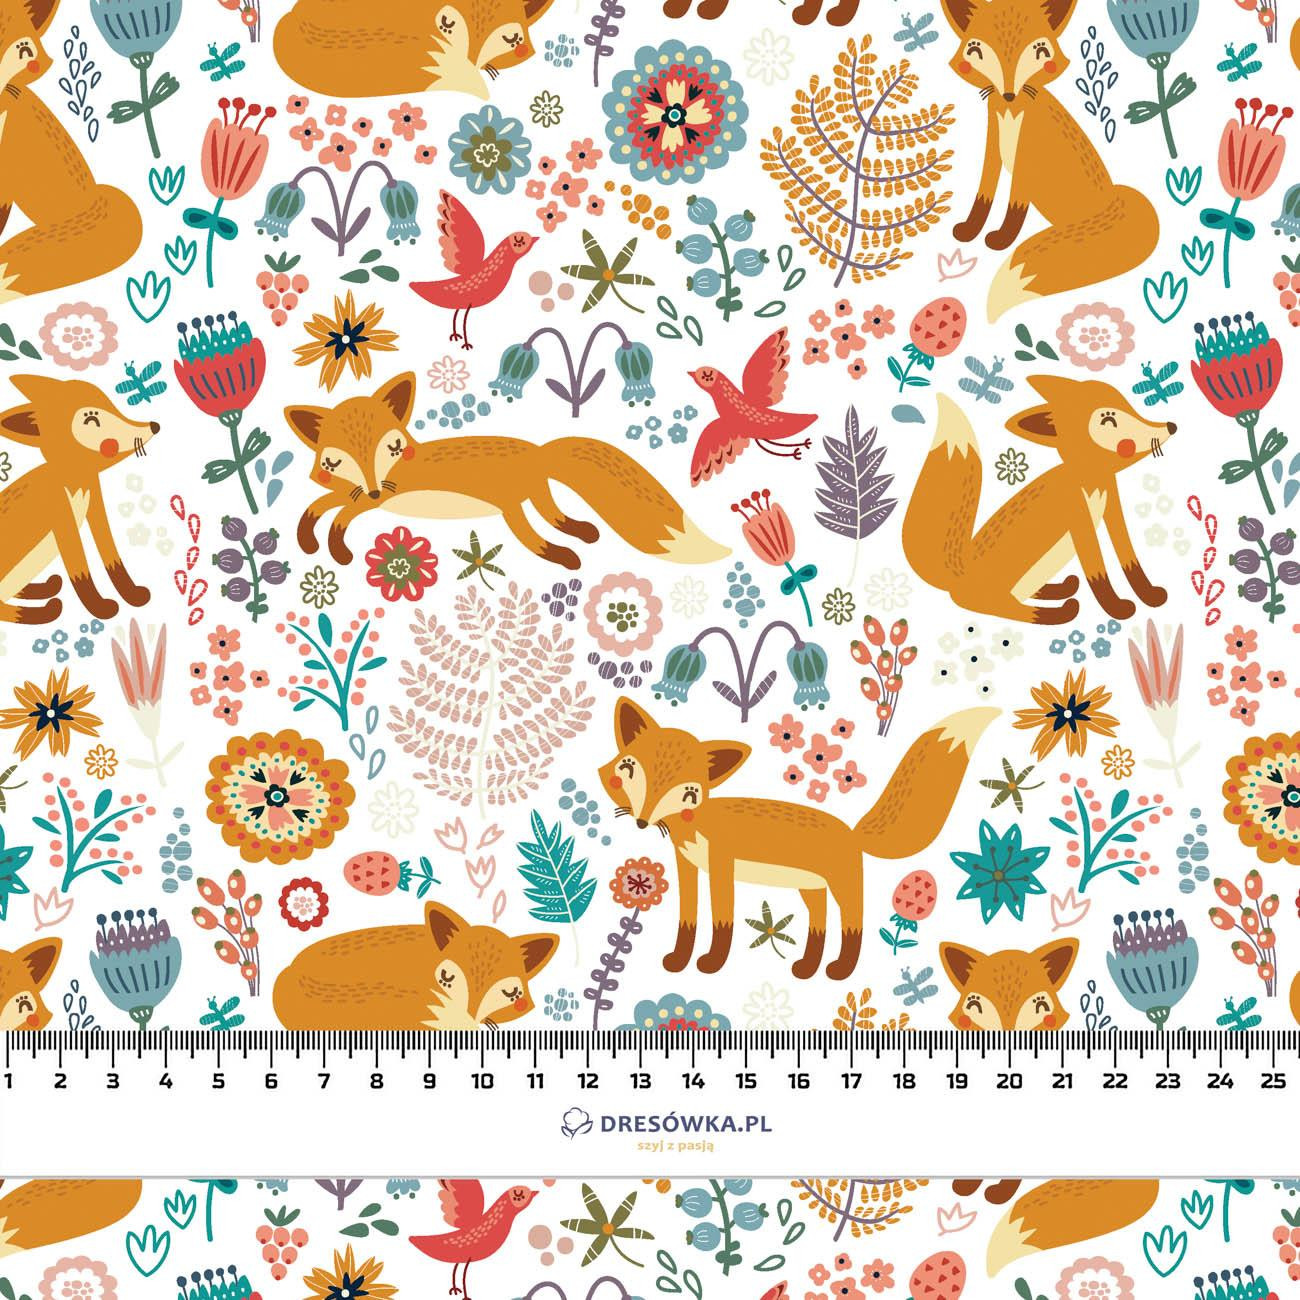 FOXES IN THE FORREST - quick-drying woven fabric